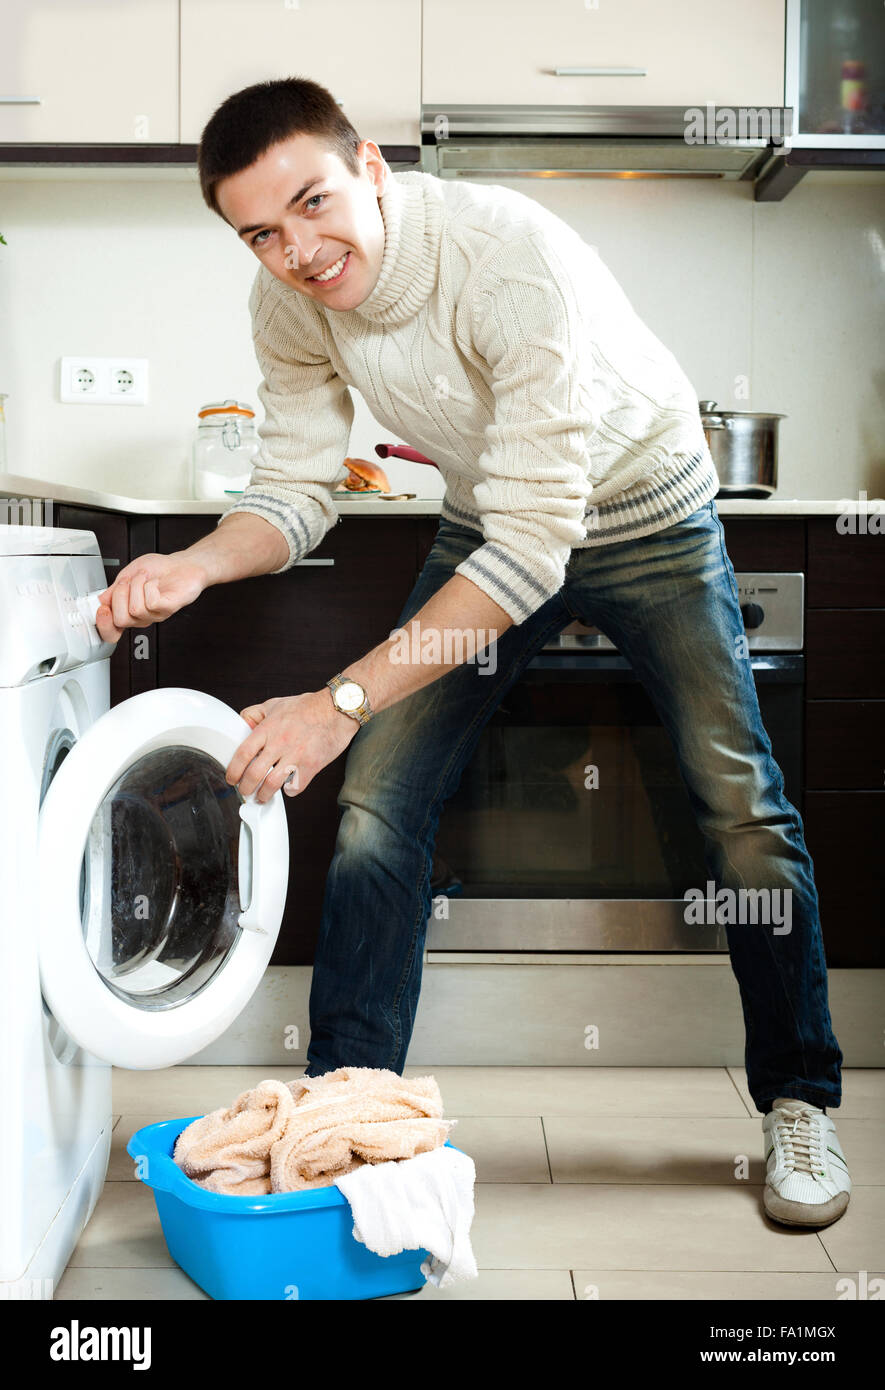 https://c8.alamy.com/comp/FA1MGX/home-laundry-handsome-guy-loading-clothes-into-the-washing-machine-FA1MGX.jpg